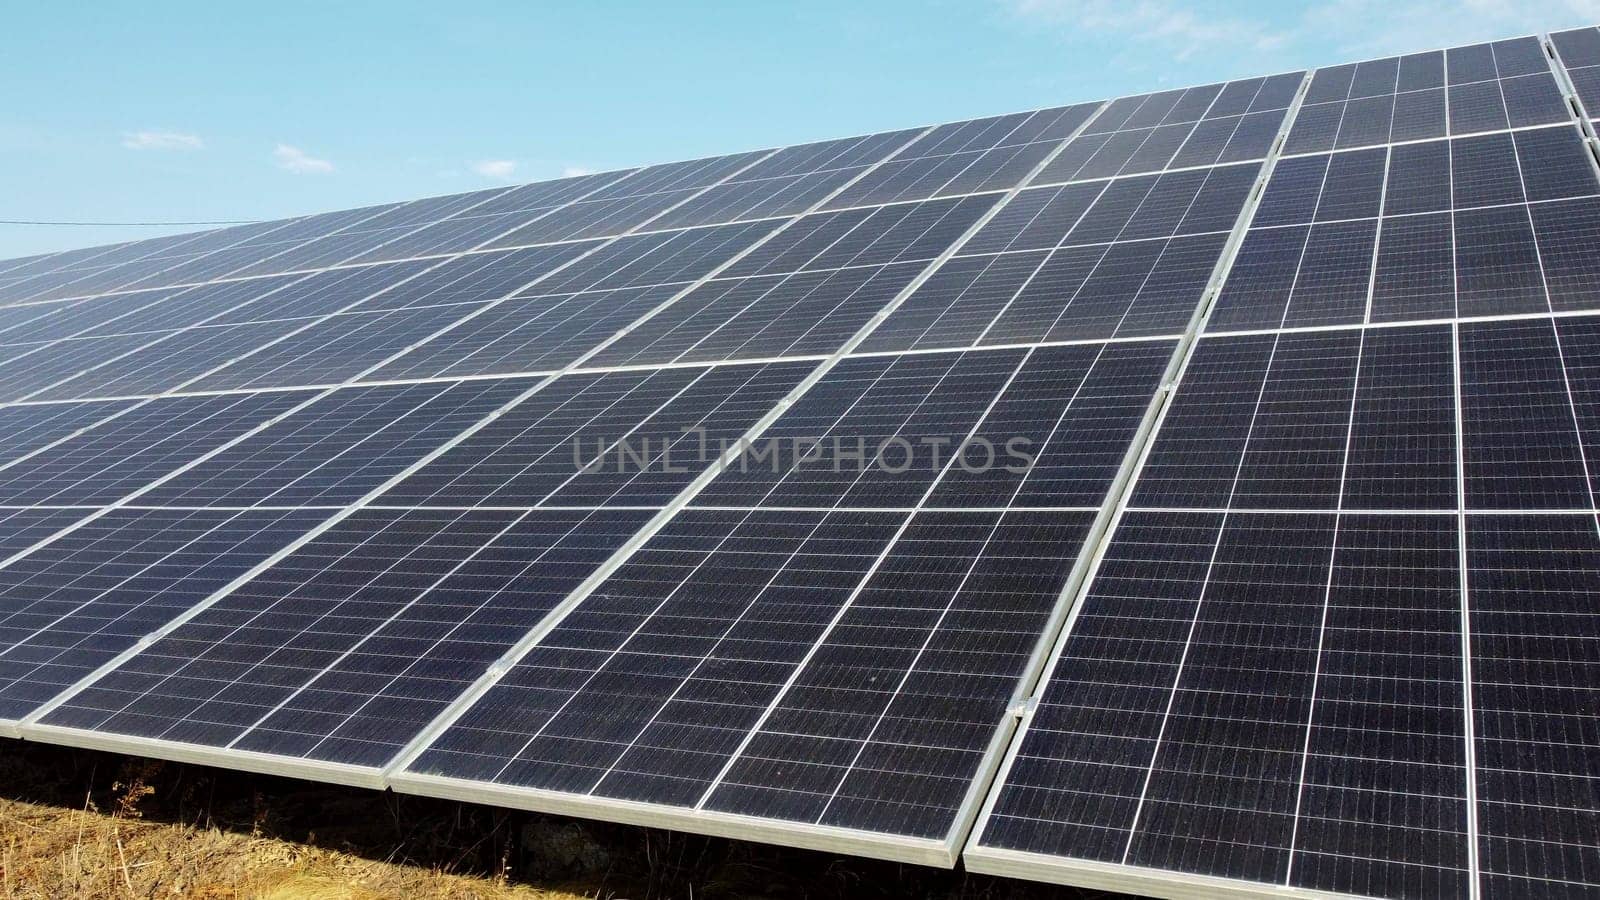 Solar power plant. Flight over modules of solar power station on sunny day. Alternative green electricity power. New modern technology. Renewable electrical energy. photovoltaic modules photobatteries